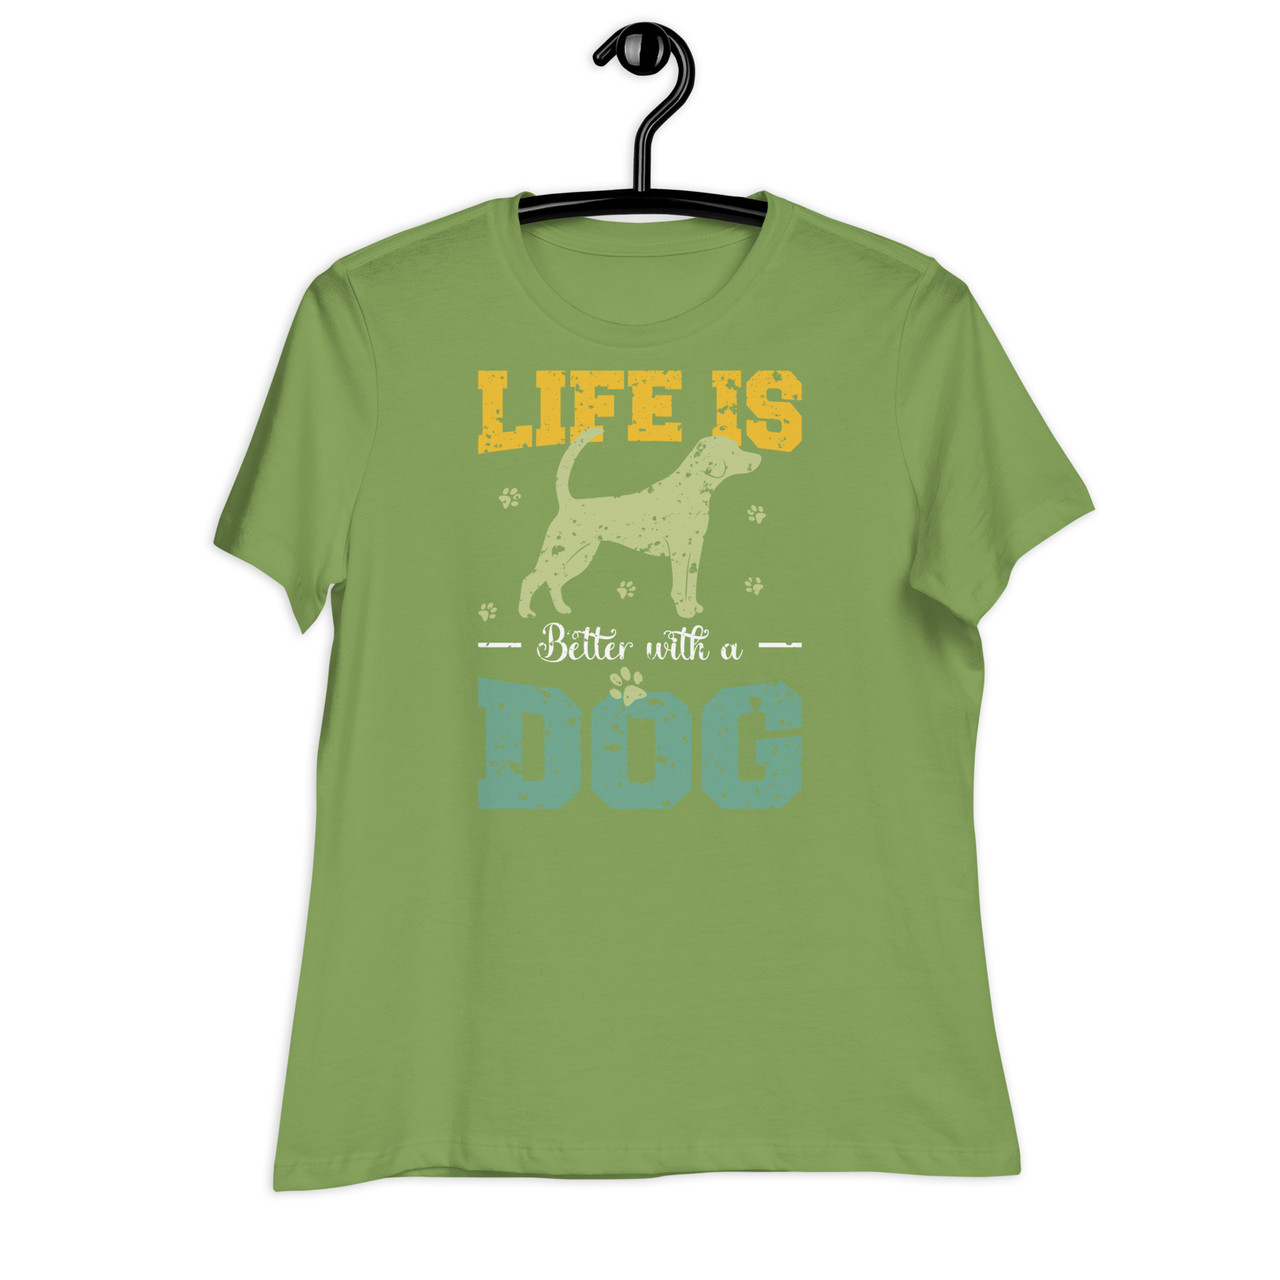 Life Is Better With A Dog Women's Relaxed T-Shirt - Bella + Canvas 6400 